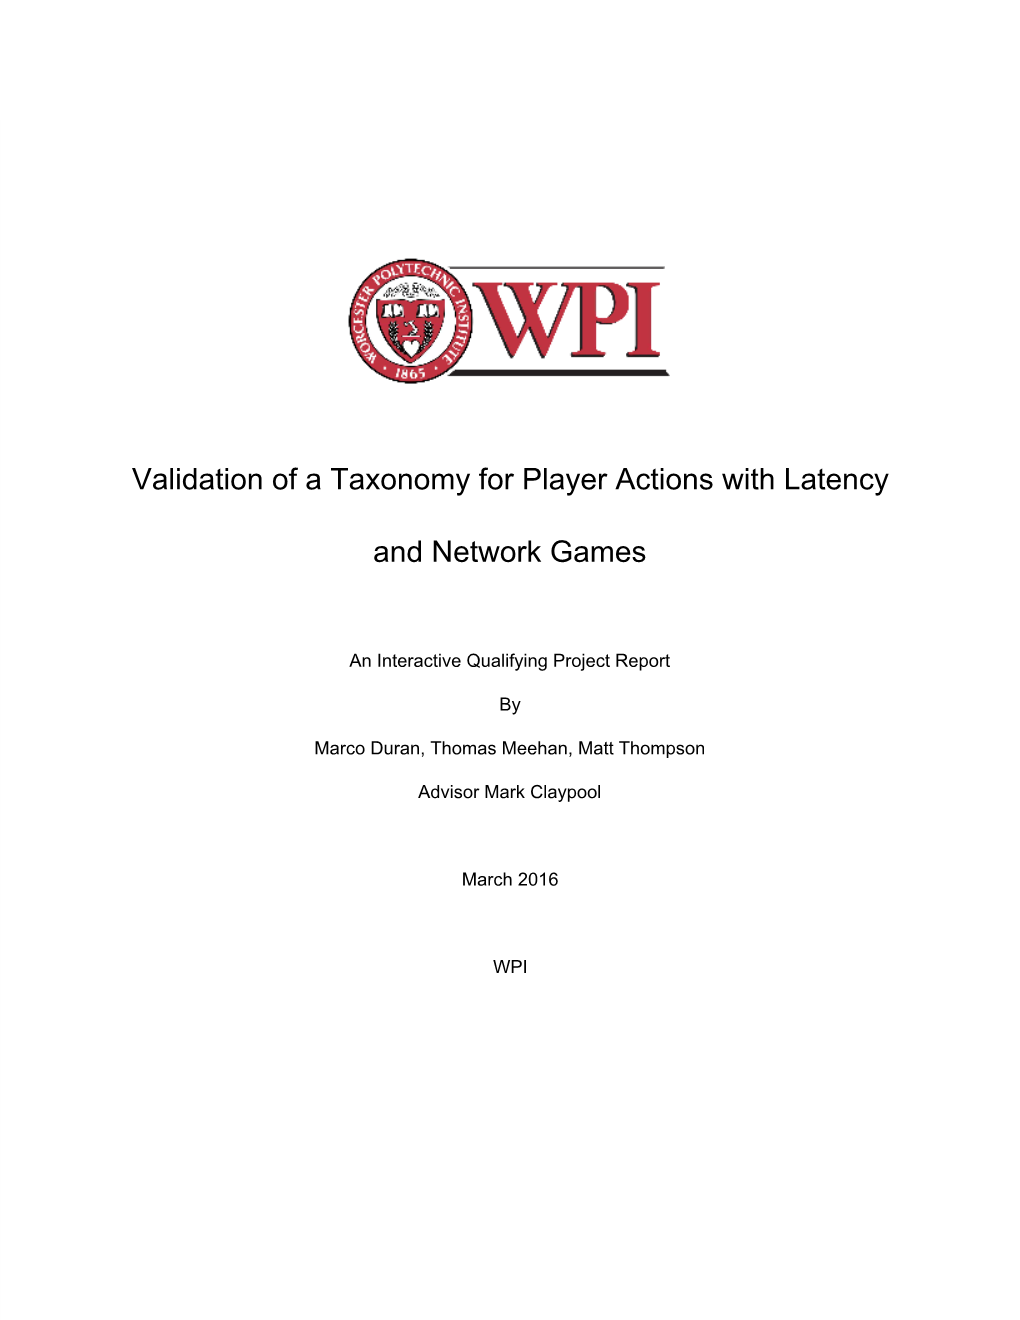 Validation of a Taxonomy for Player Actions with Latency and Network